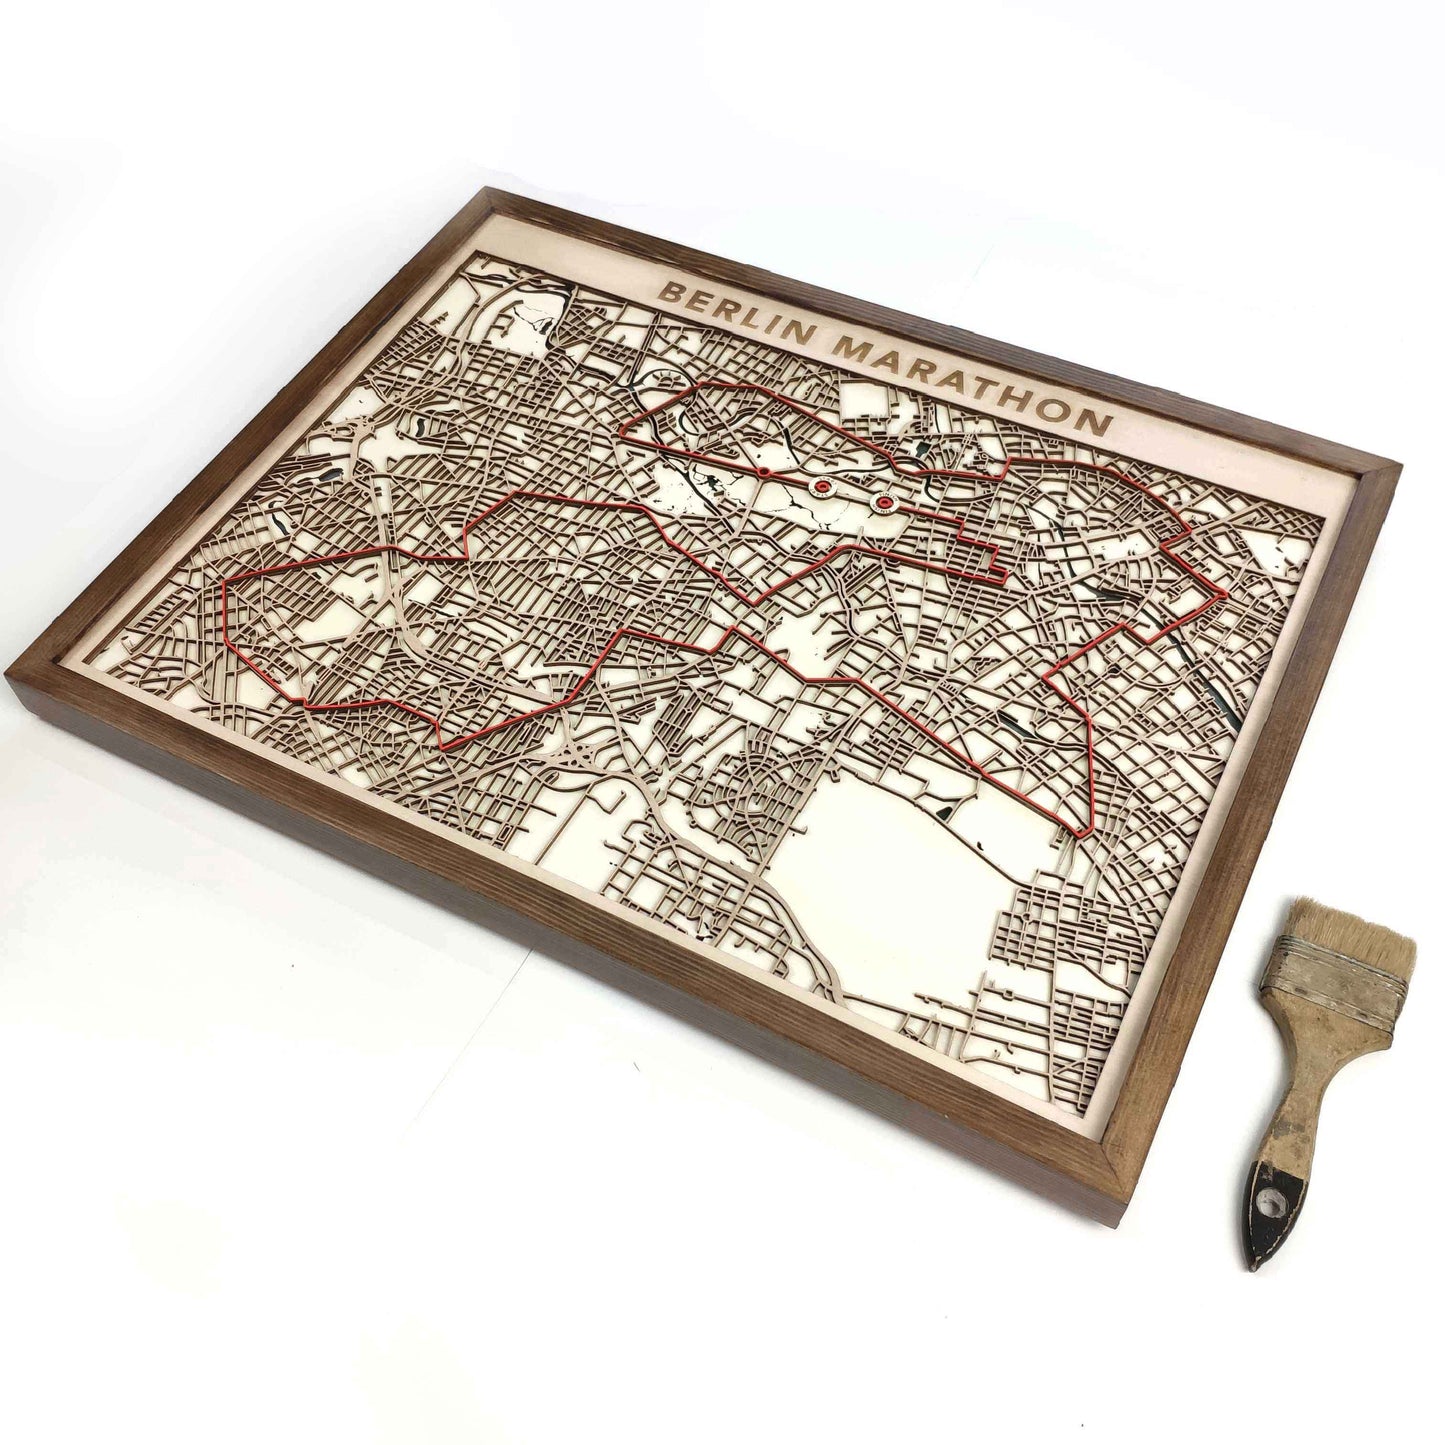 Berlin Marathon Commemorative Wooden Route Map – Collector's Item by CityWood - Custom Wood Map Art - Unique Laser Cut Engraved - Anniversary Gift